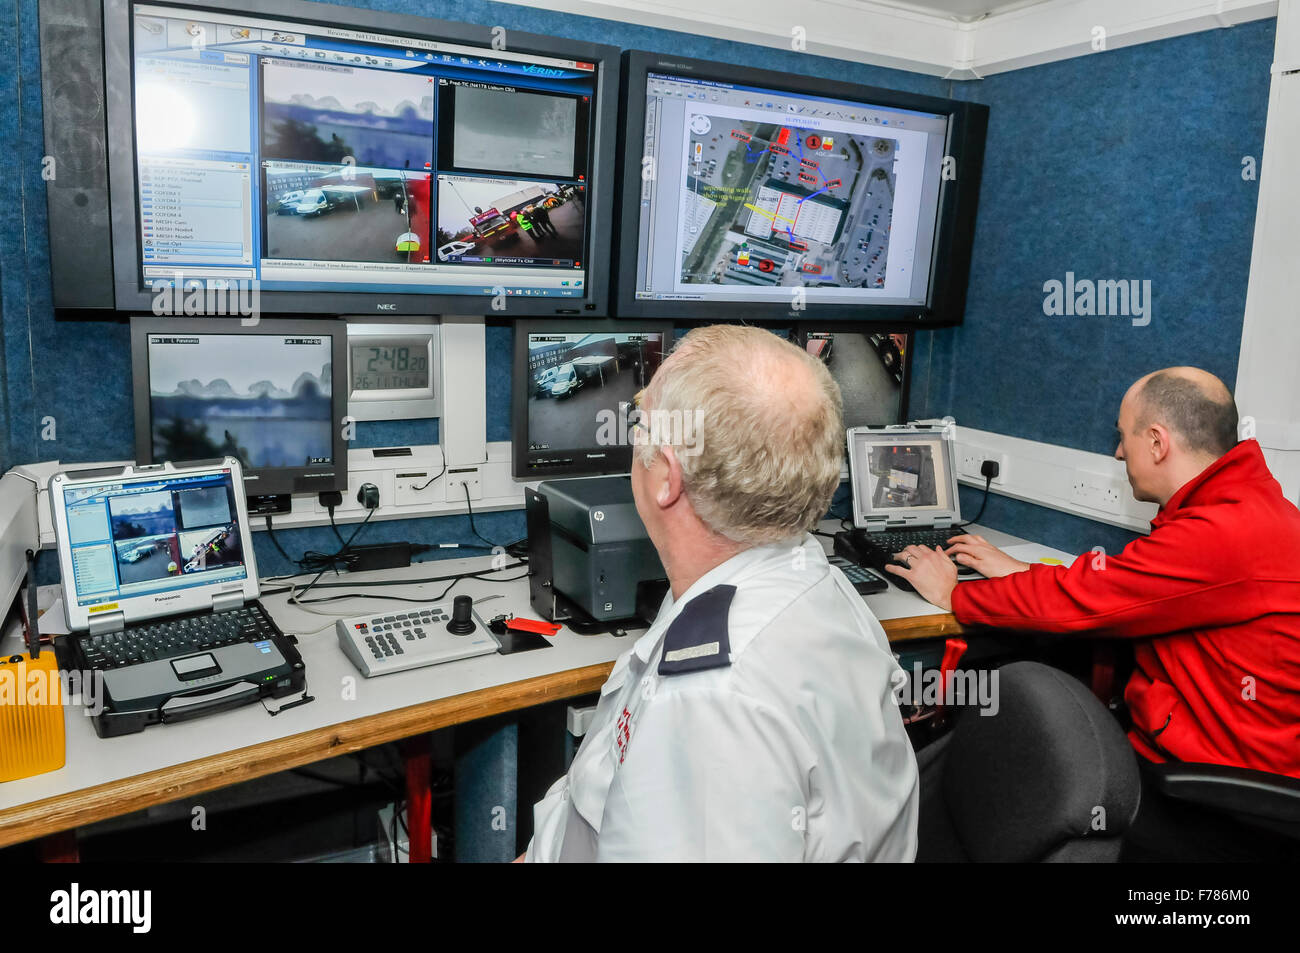 Northern Ireland. 26th November, 2015. Officers inside a Command Support unit from the Northern Ireland Fire and Rescue Service, use remote cameras and computers during a major incident to coordinate activities. Credit:  Stephen Barnes/Alamy Live News Stock Photo